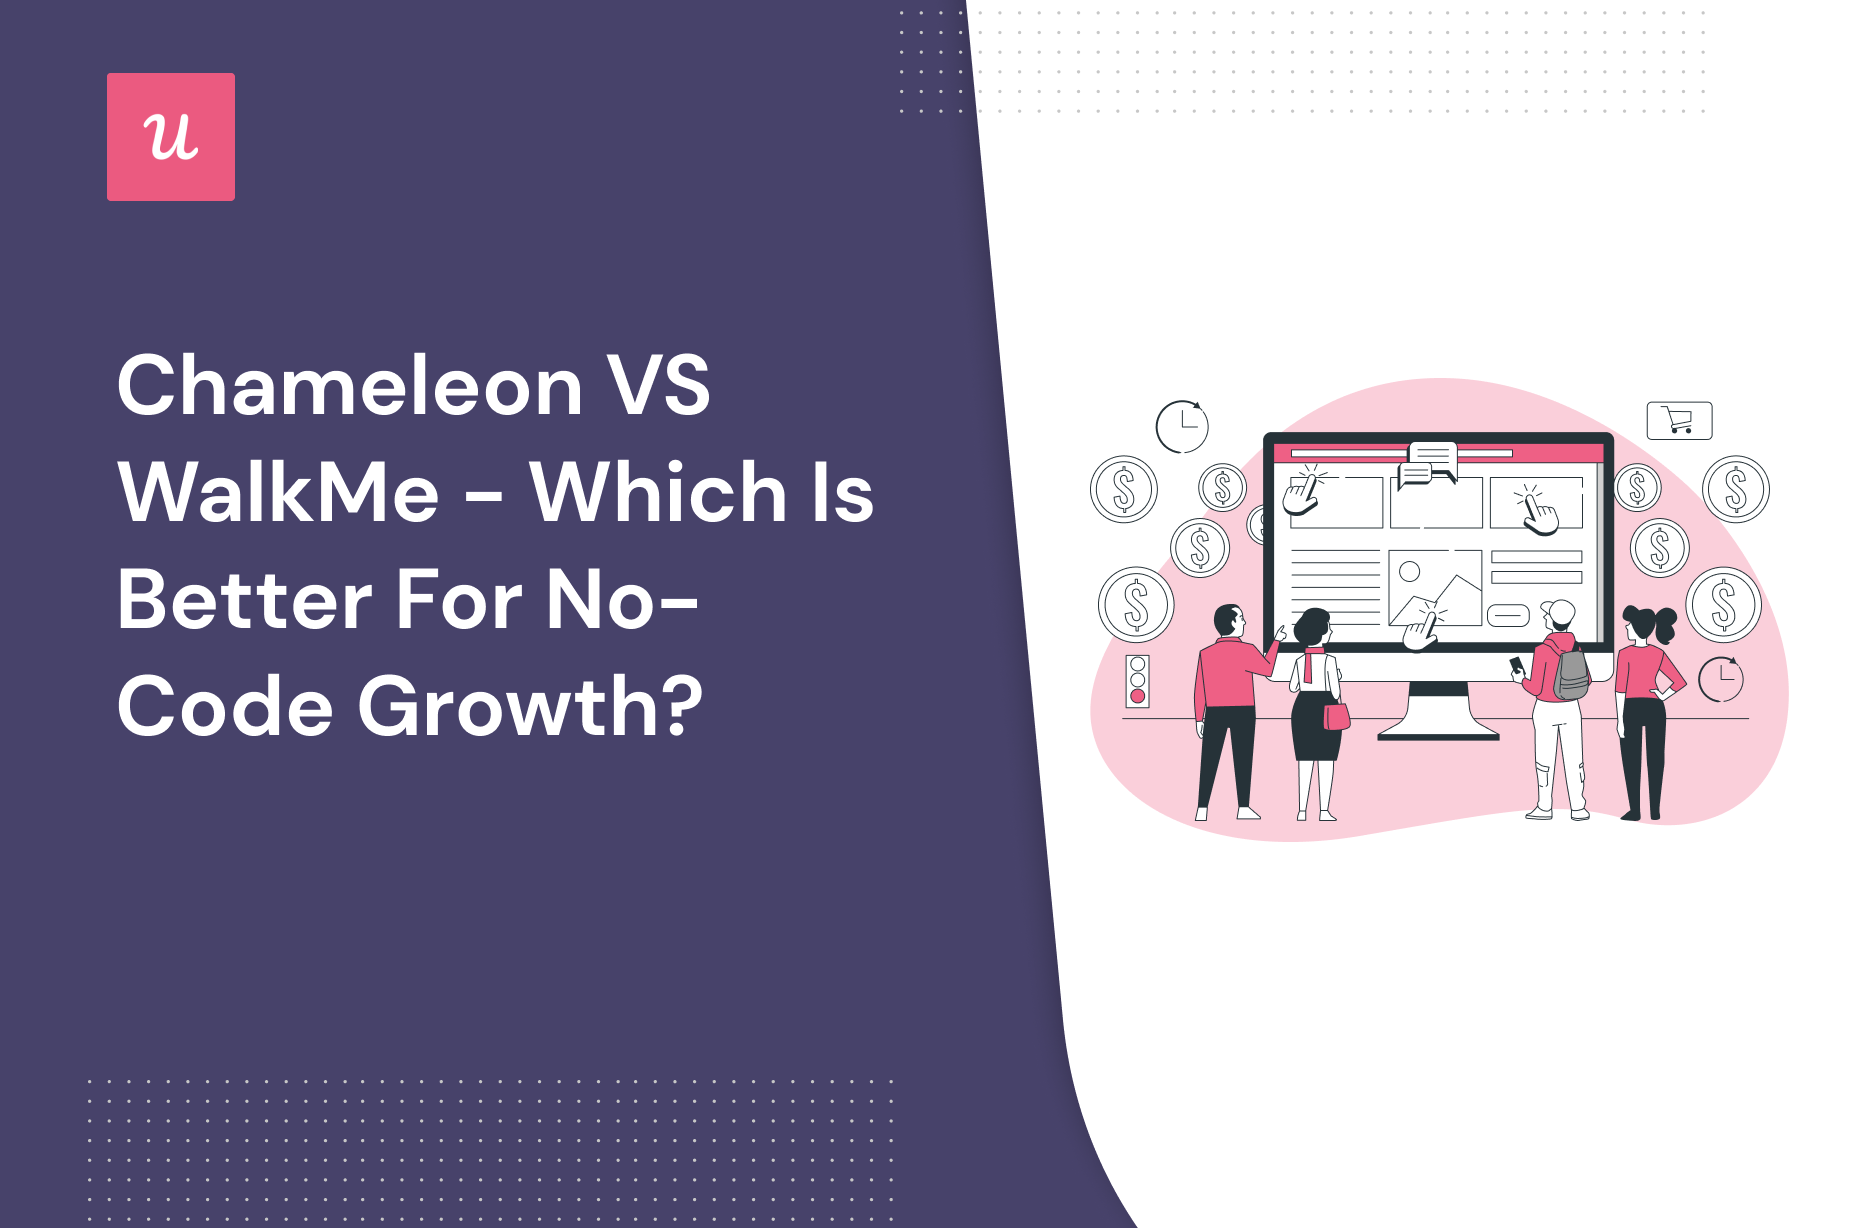 Chameleon vs Walkme - which is better for no-code growth